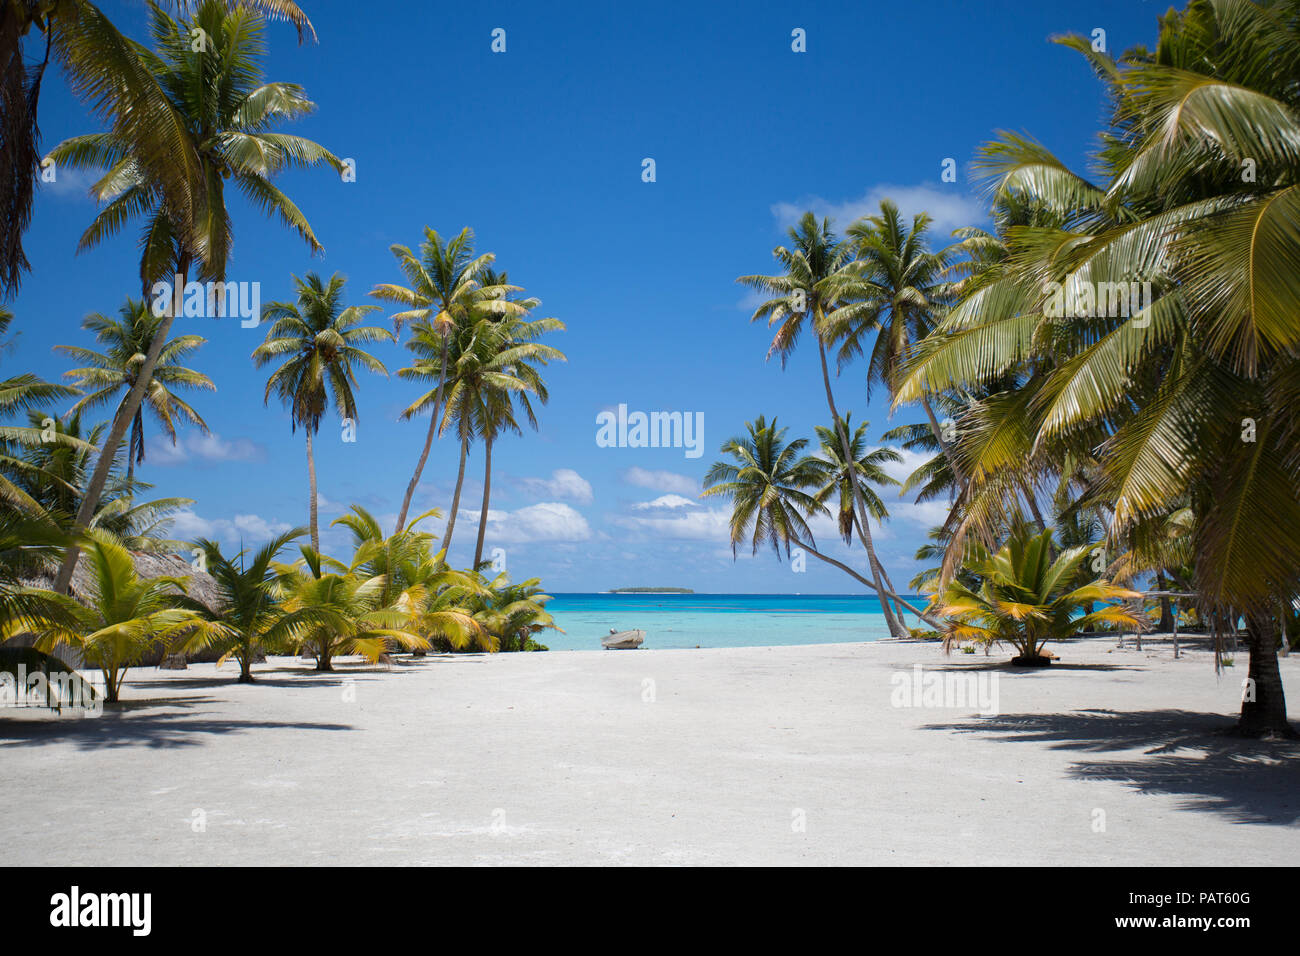 Cook Islands, Palmerston Island. Remote tropical island in the South Pacific. White sand pathway. Stock Photo